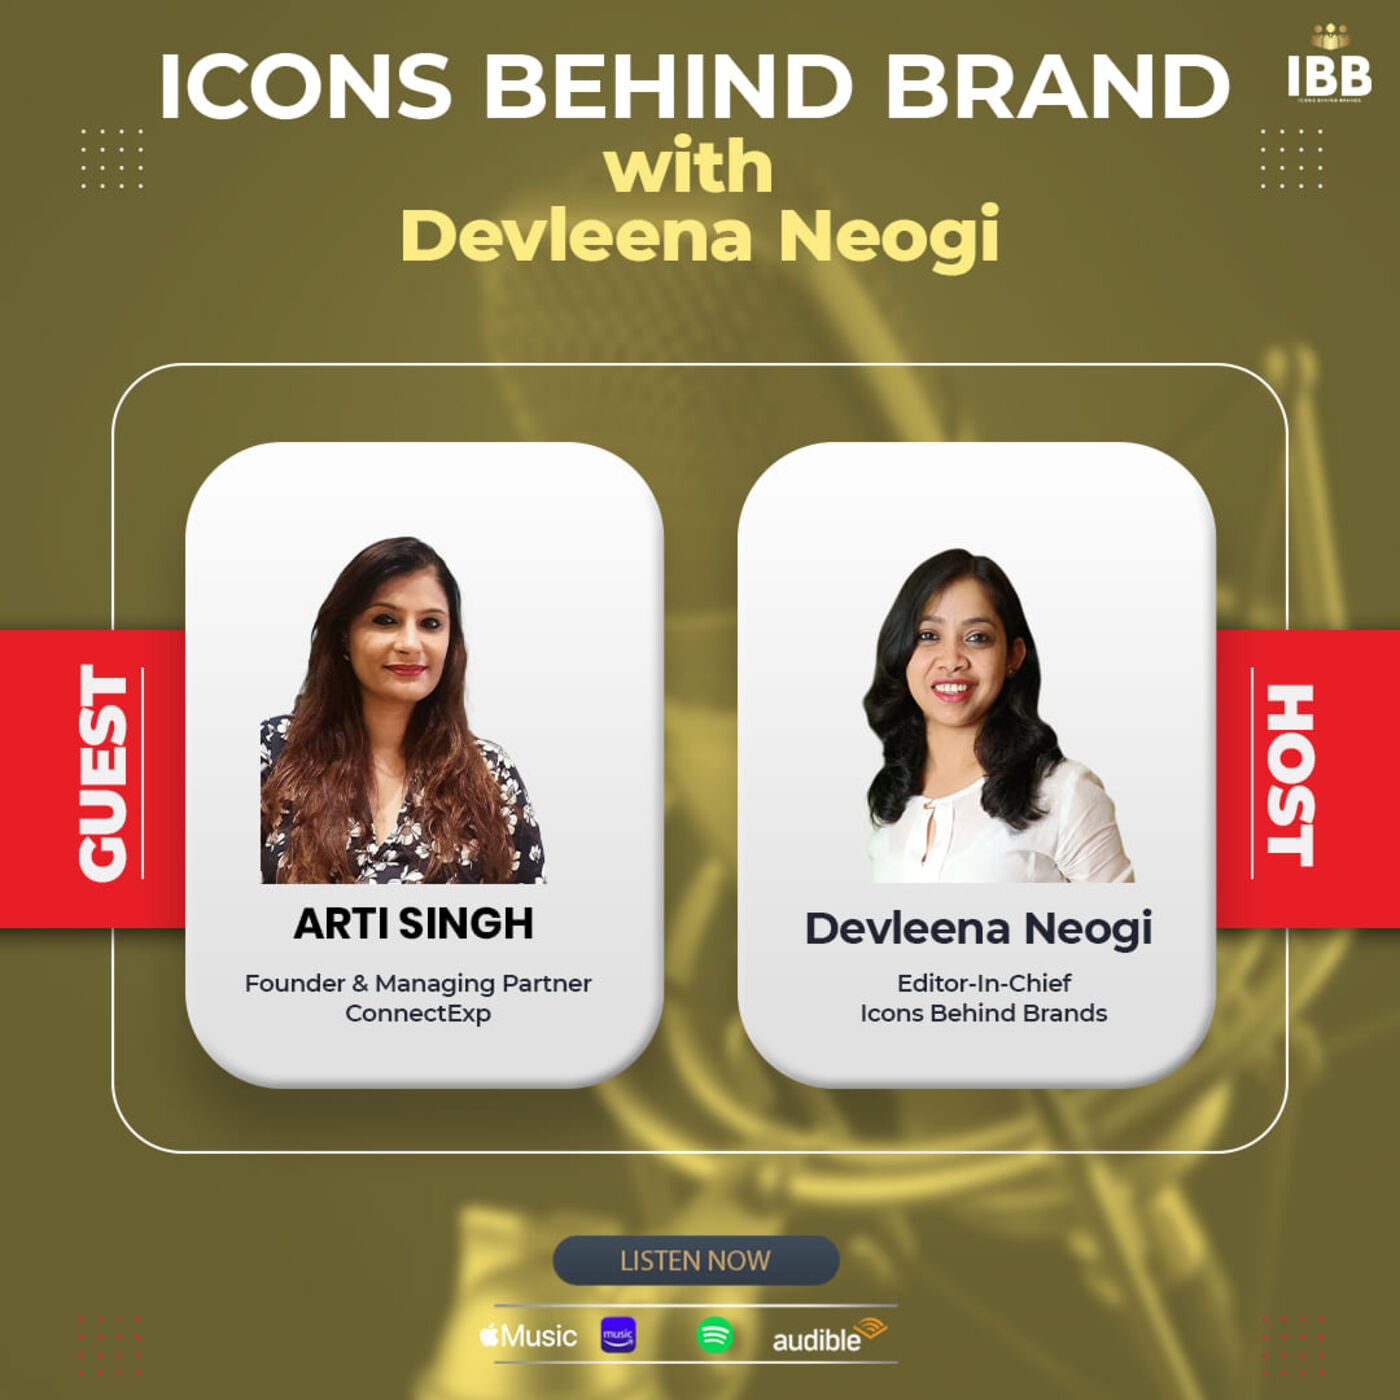 Interview on the expanding the horizon of technology, knowing about cookies with Ms. Arti Singh -Founder and Managing Director, Connectexp,| IBB